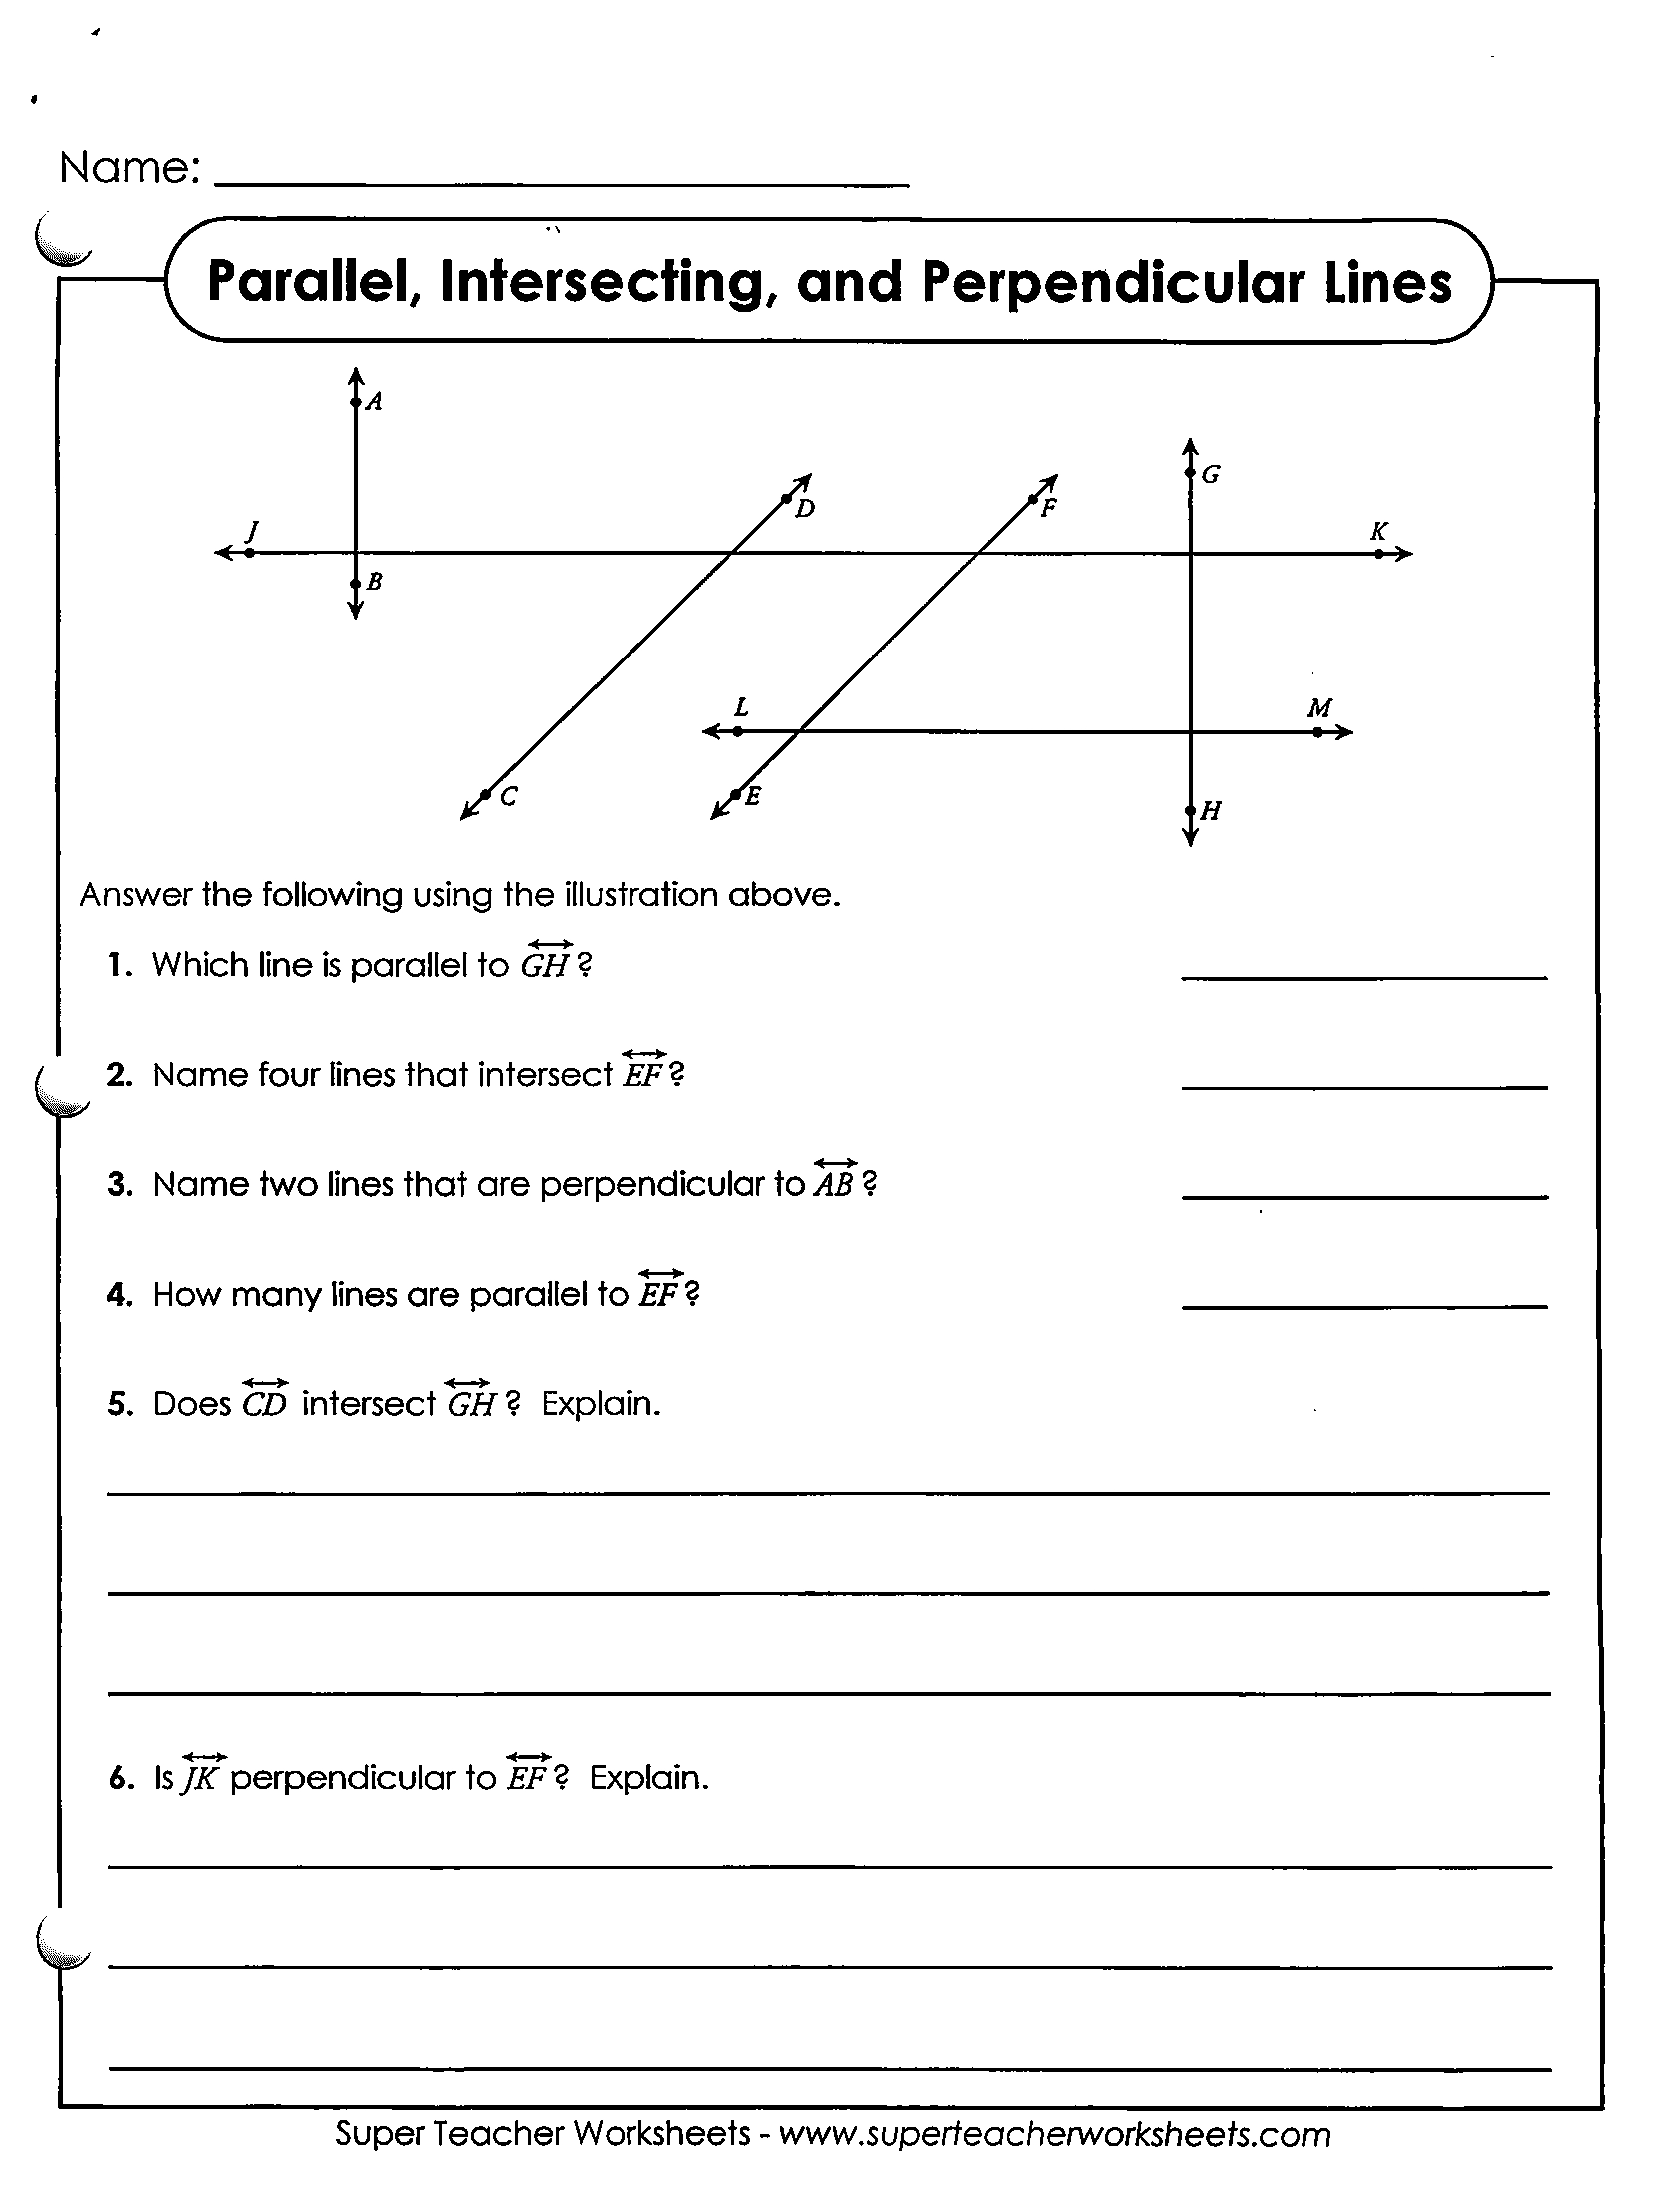 equations-of-parallel-and-perpendicular-lines-worksheet-kuta-tessshebaylo